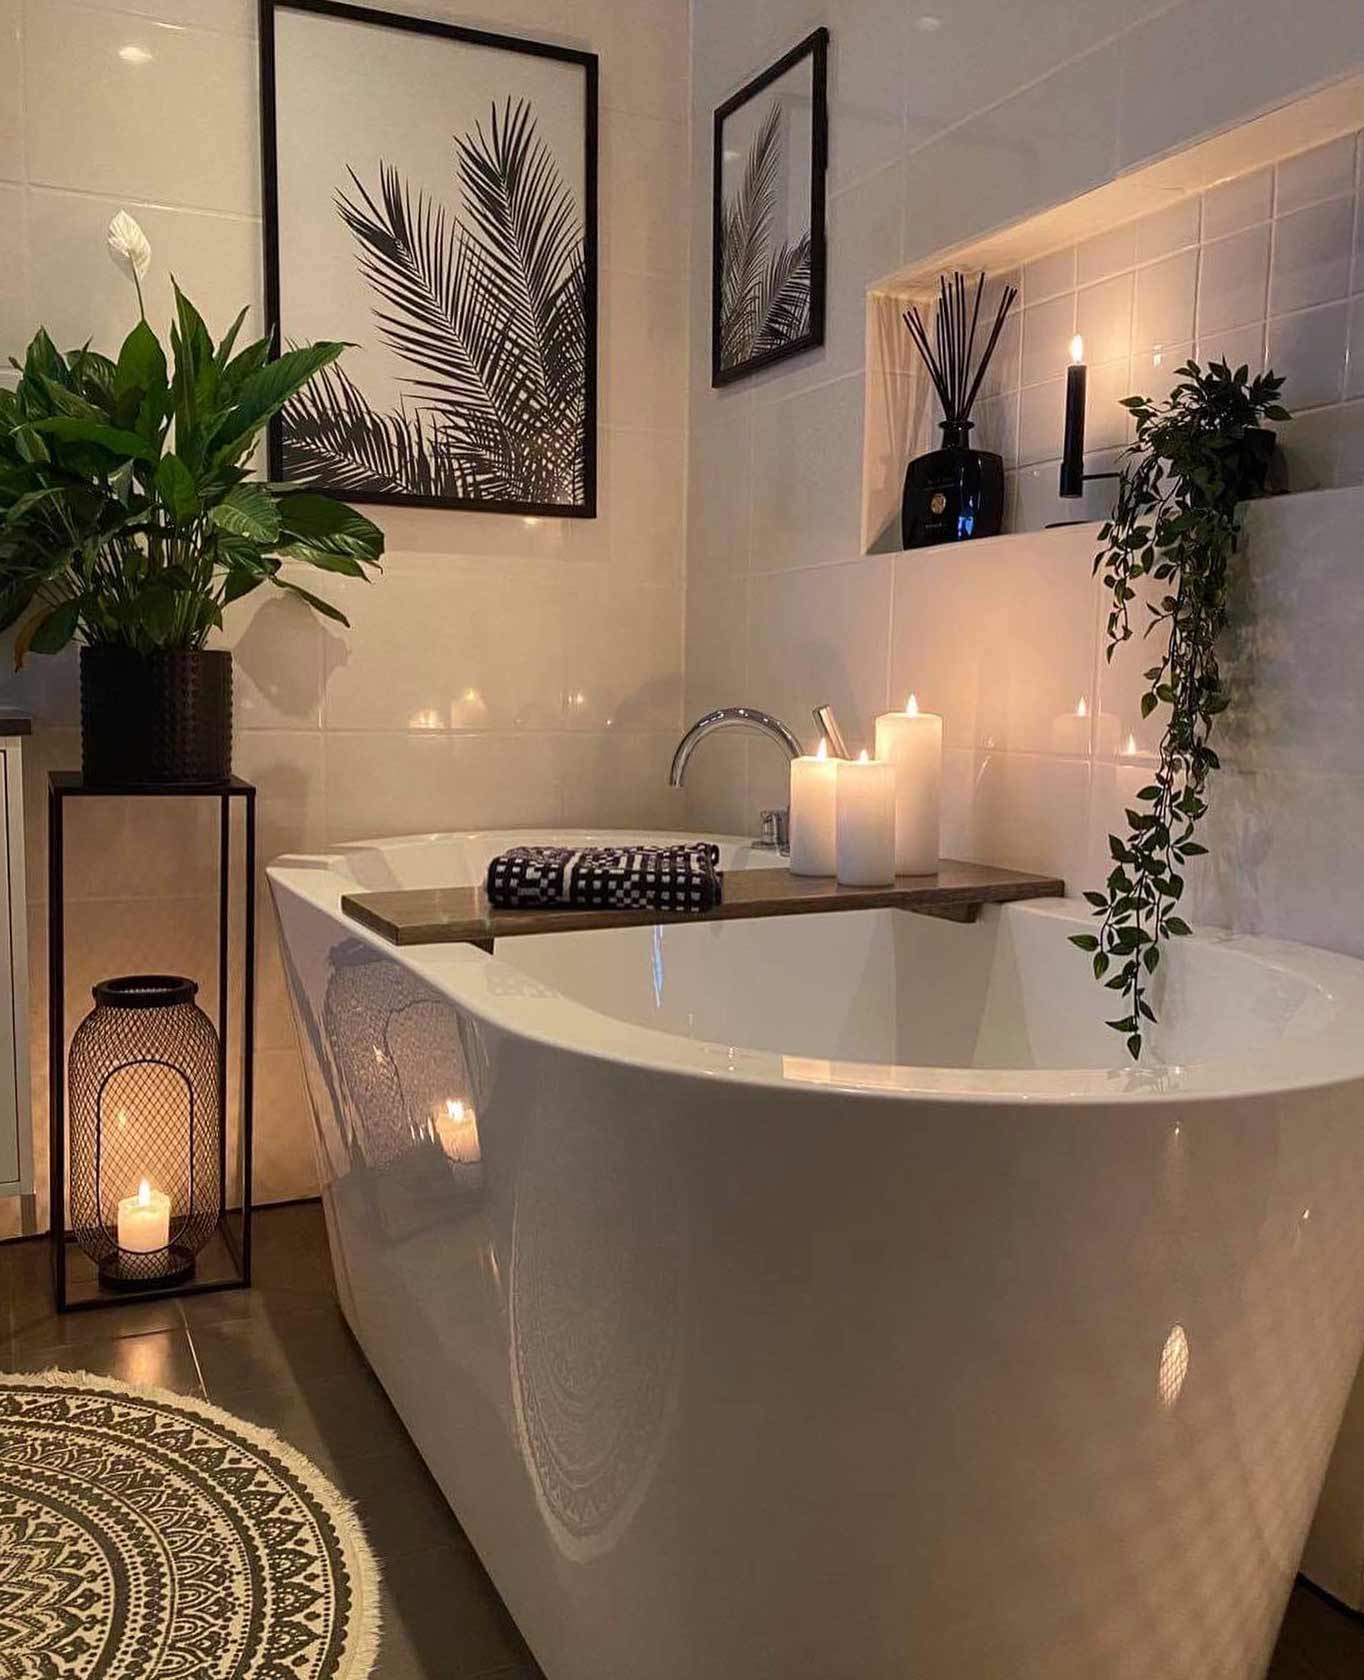 Bathroom with plant, carpet and candle lights